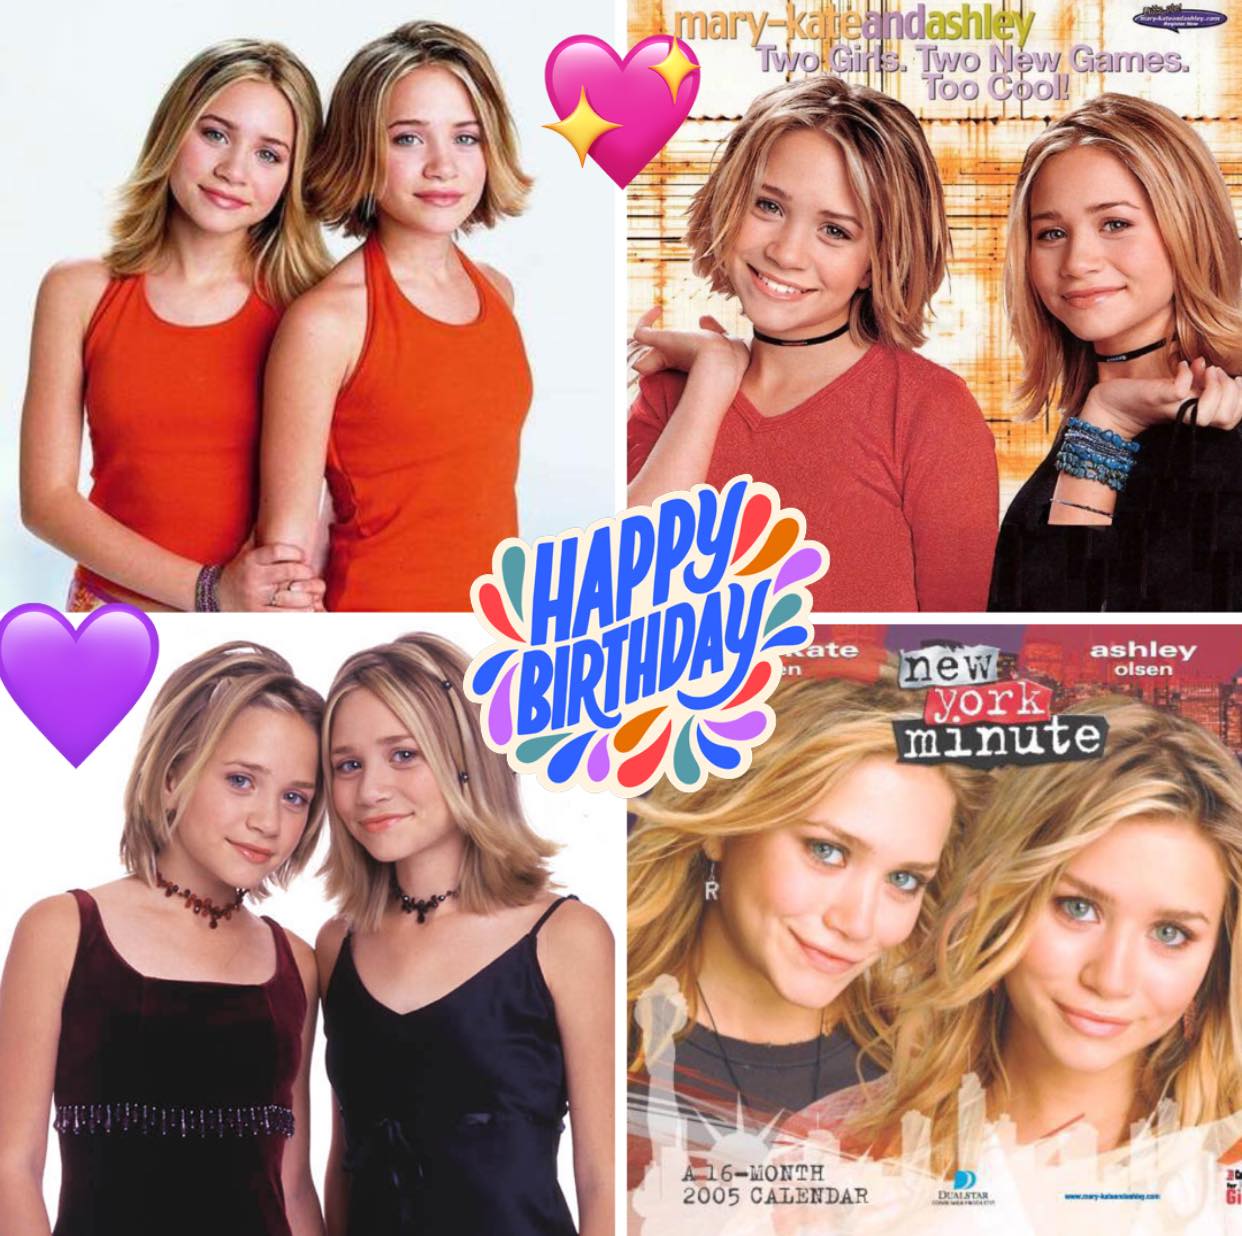 Happy belated 35th birthday Mary-Kate & Ashley Olsen, much love from a long time fan!                 